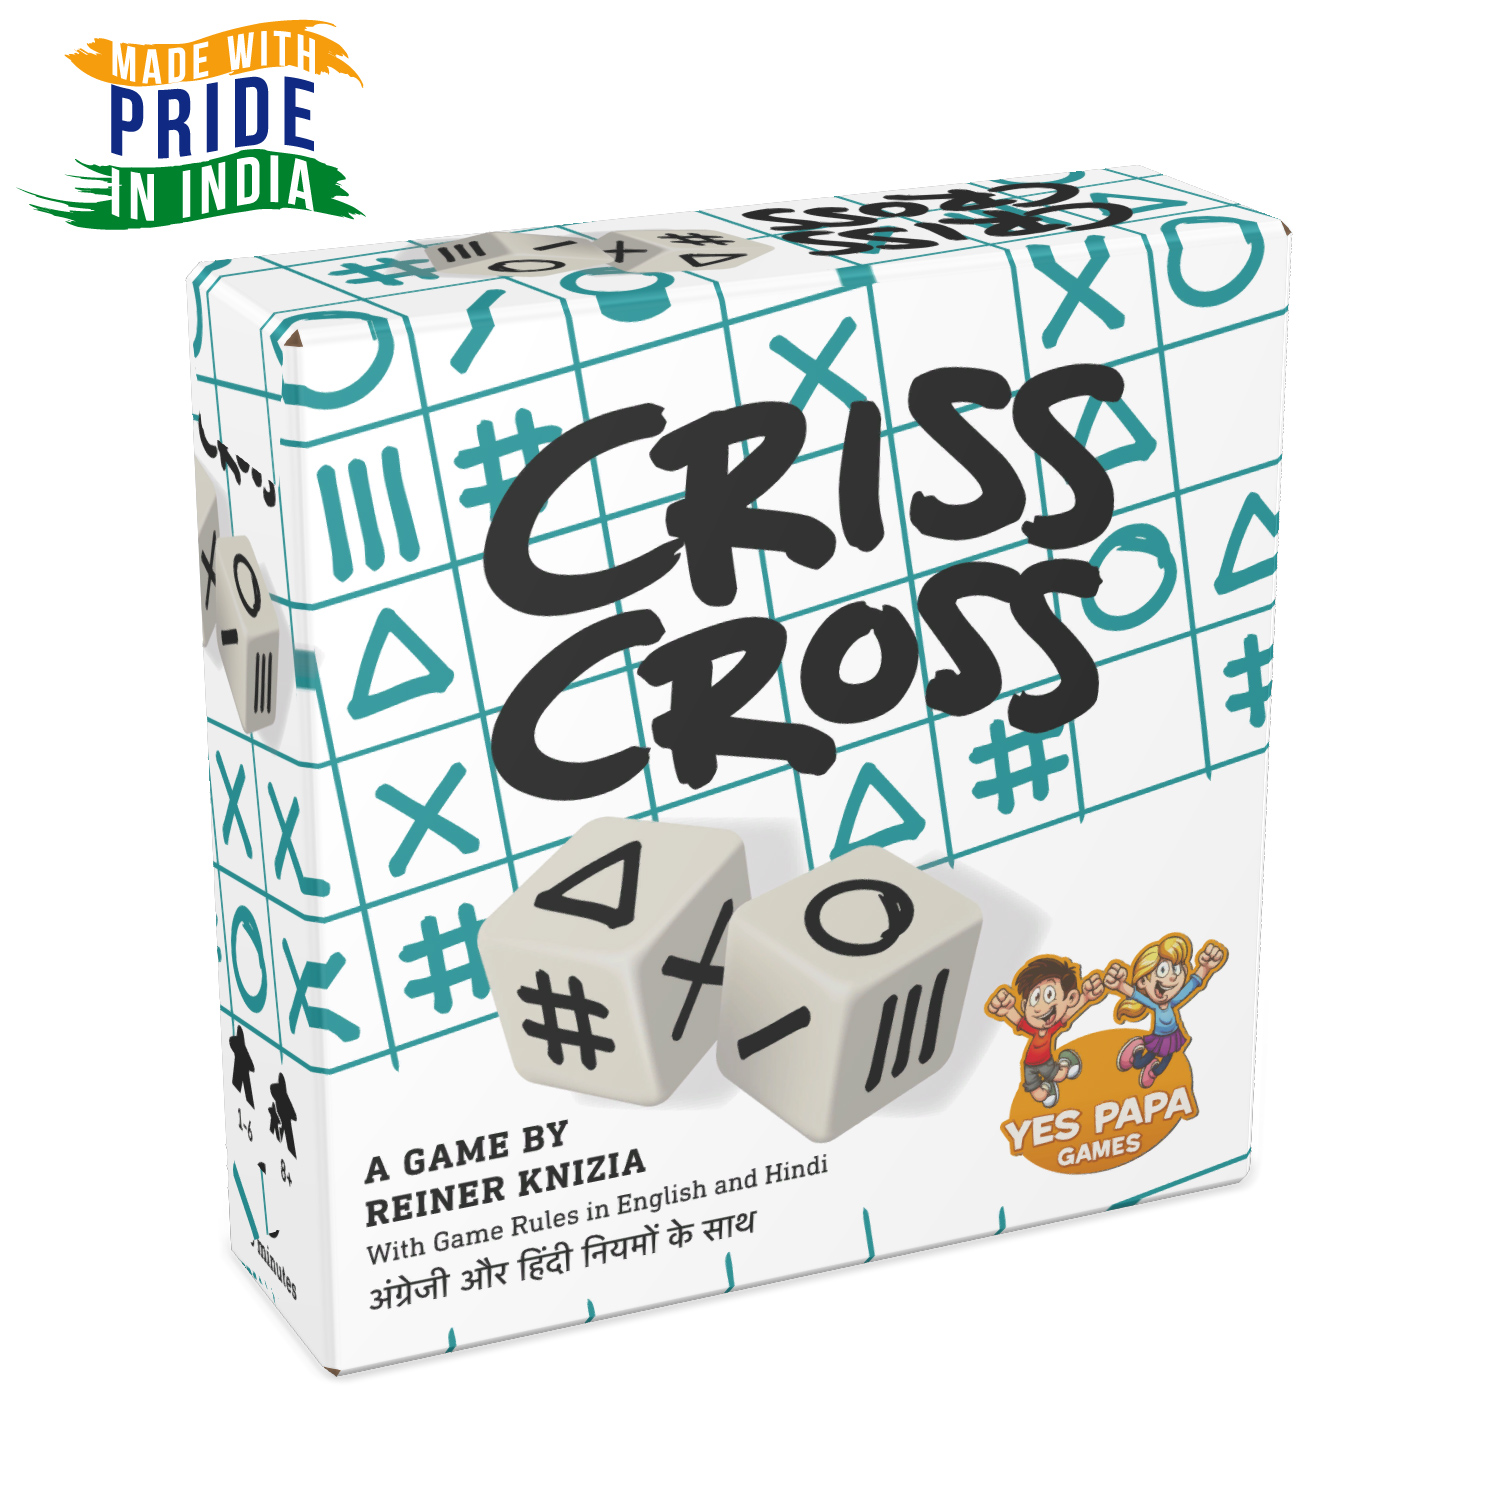 Buy Criss Cross only at Board Games India - Best Price, Free and Fast  Shipping